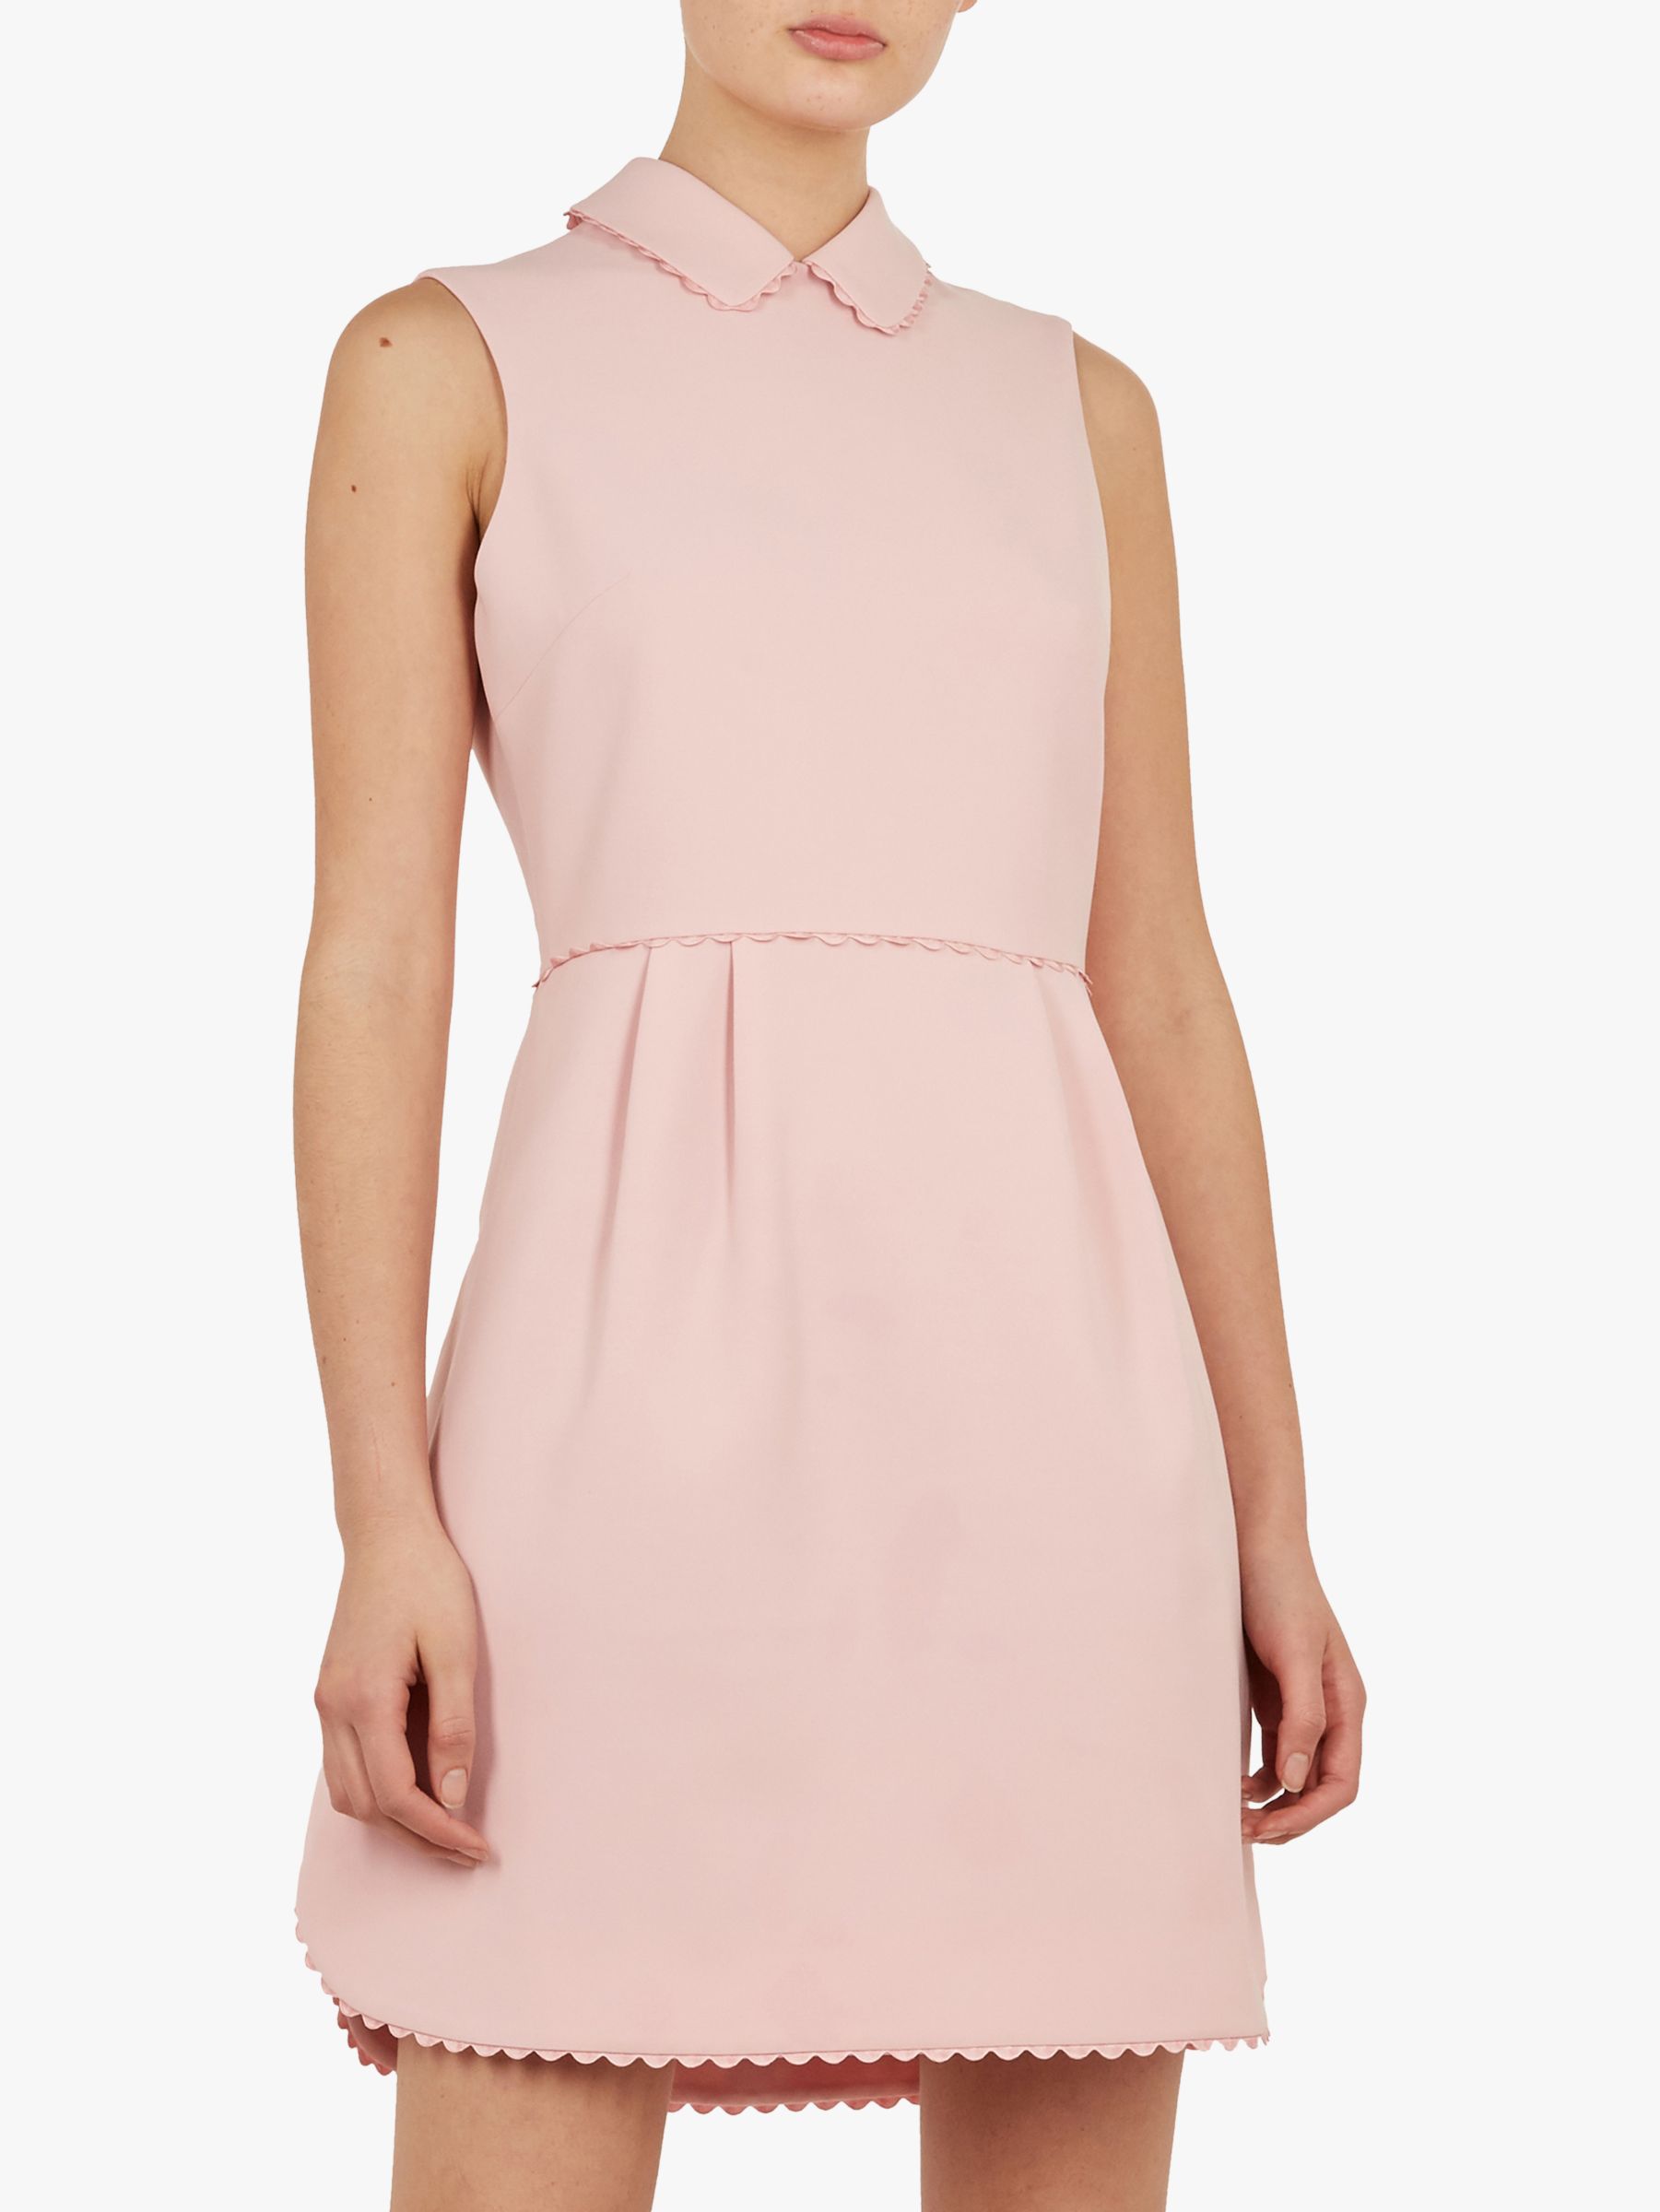 ted baker pink scallop dress